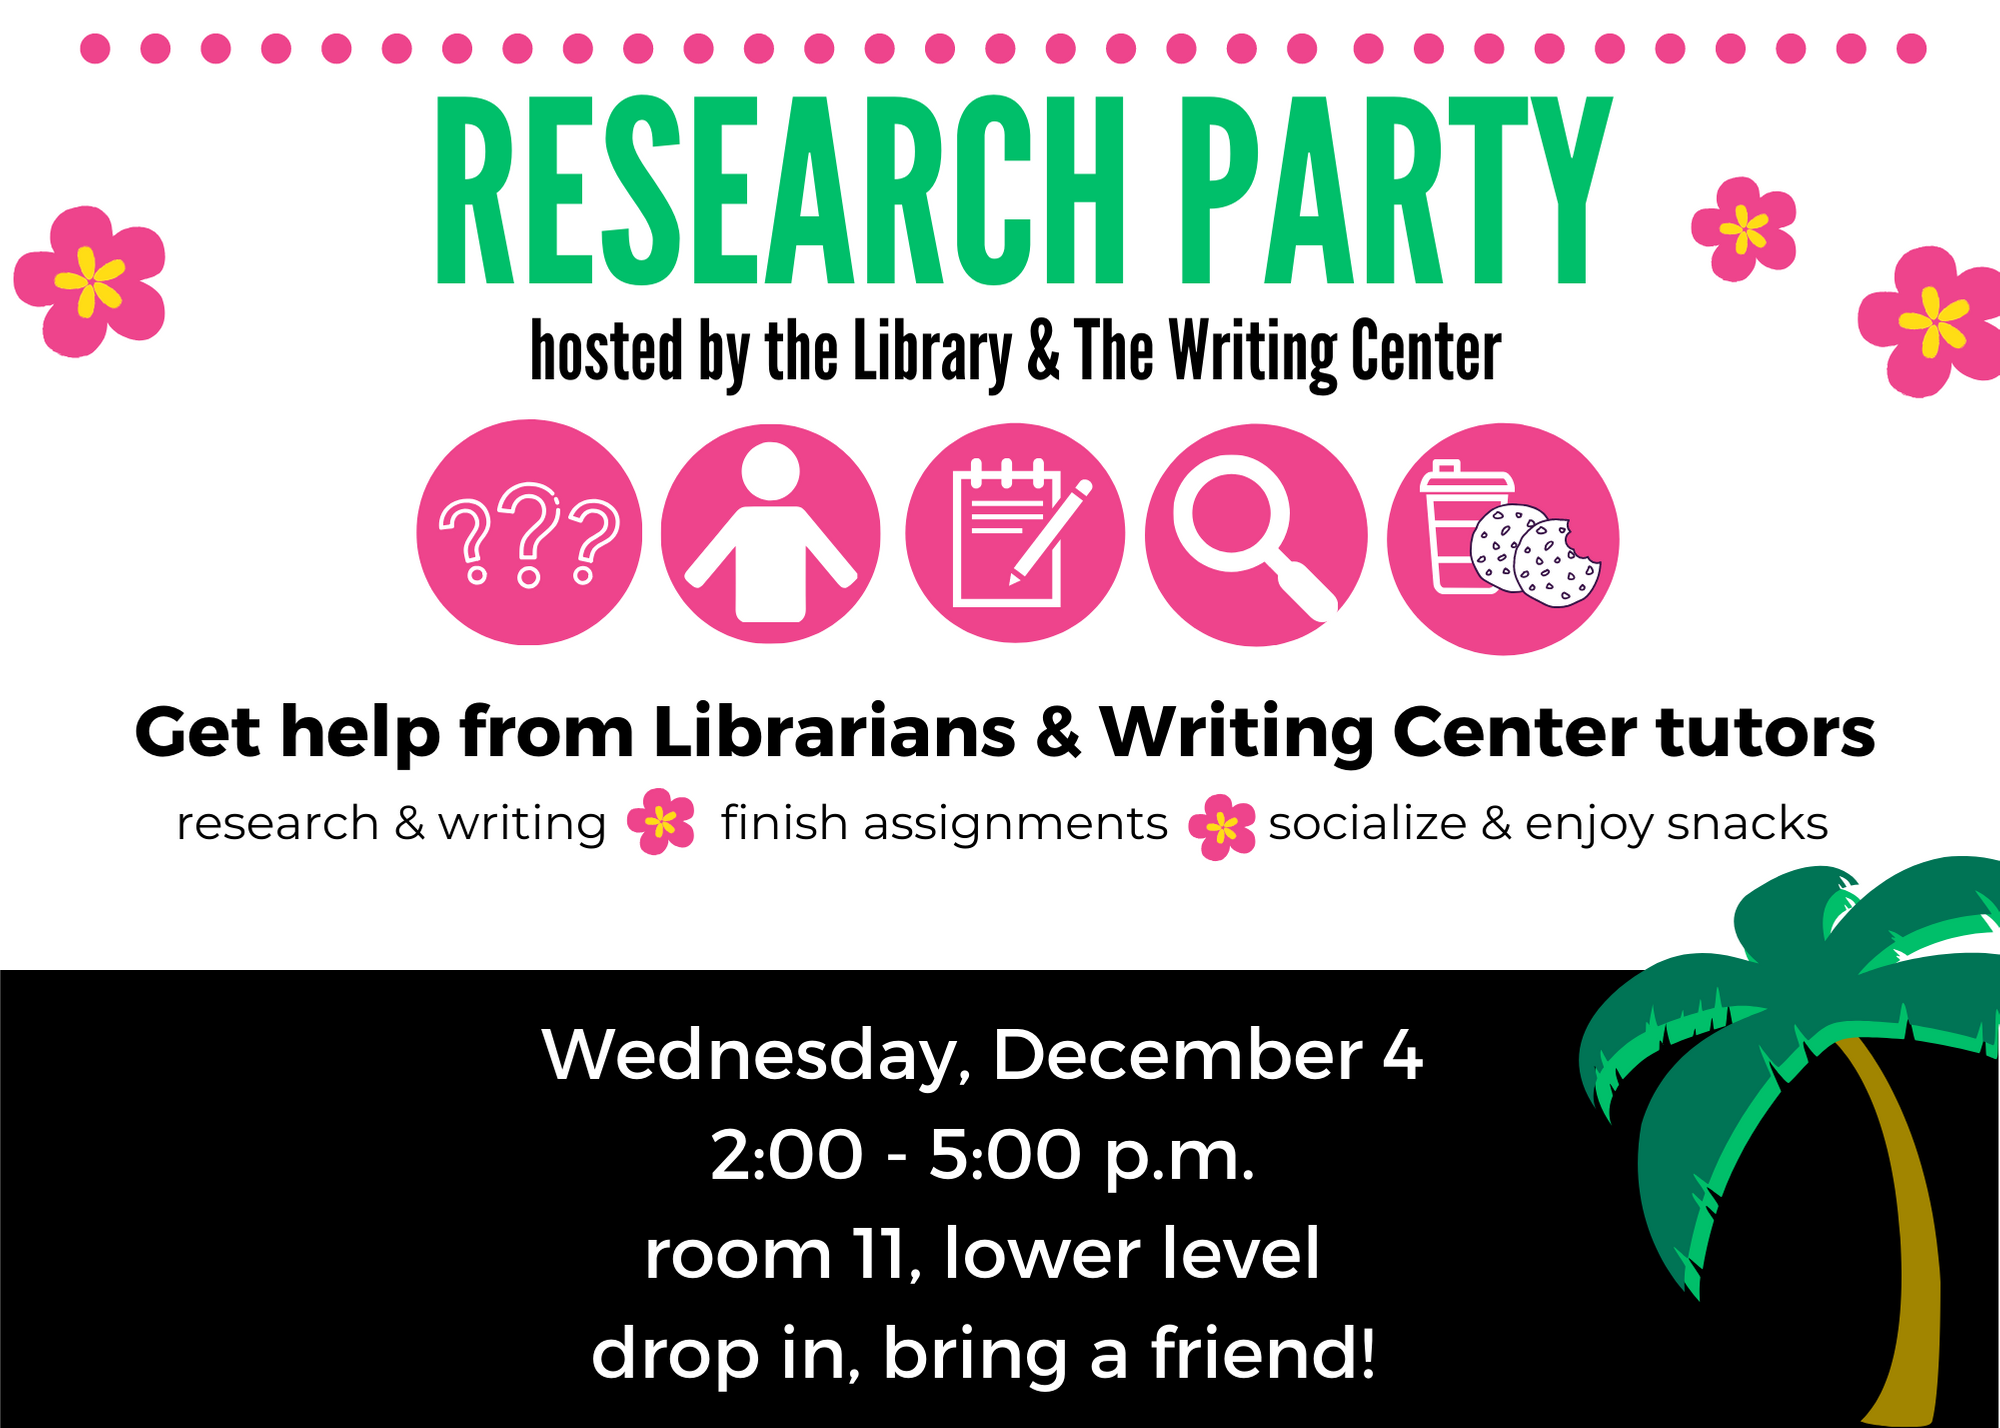 Research Party hosted by the Library & The Writing Center flyer. Wednesday, December 4, 2:00-5:00 p.m. Room 11, Lower Level.